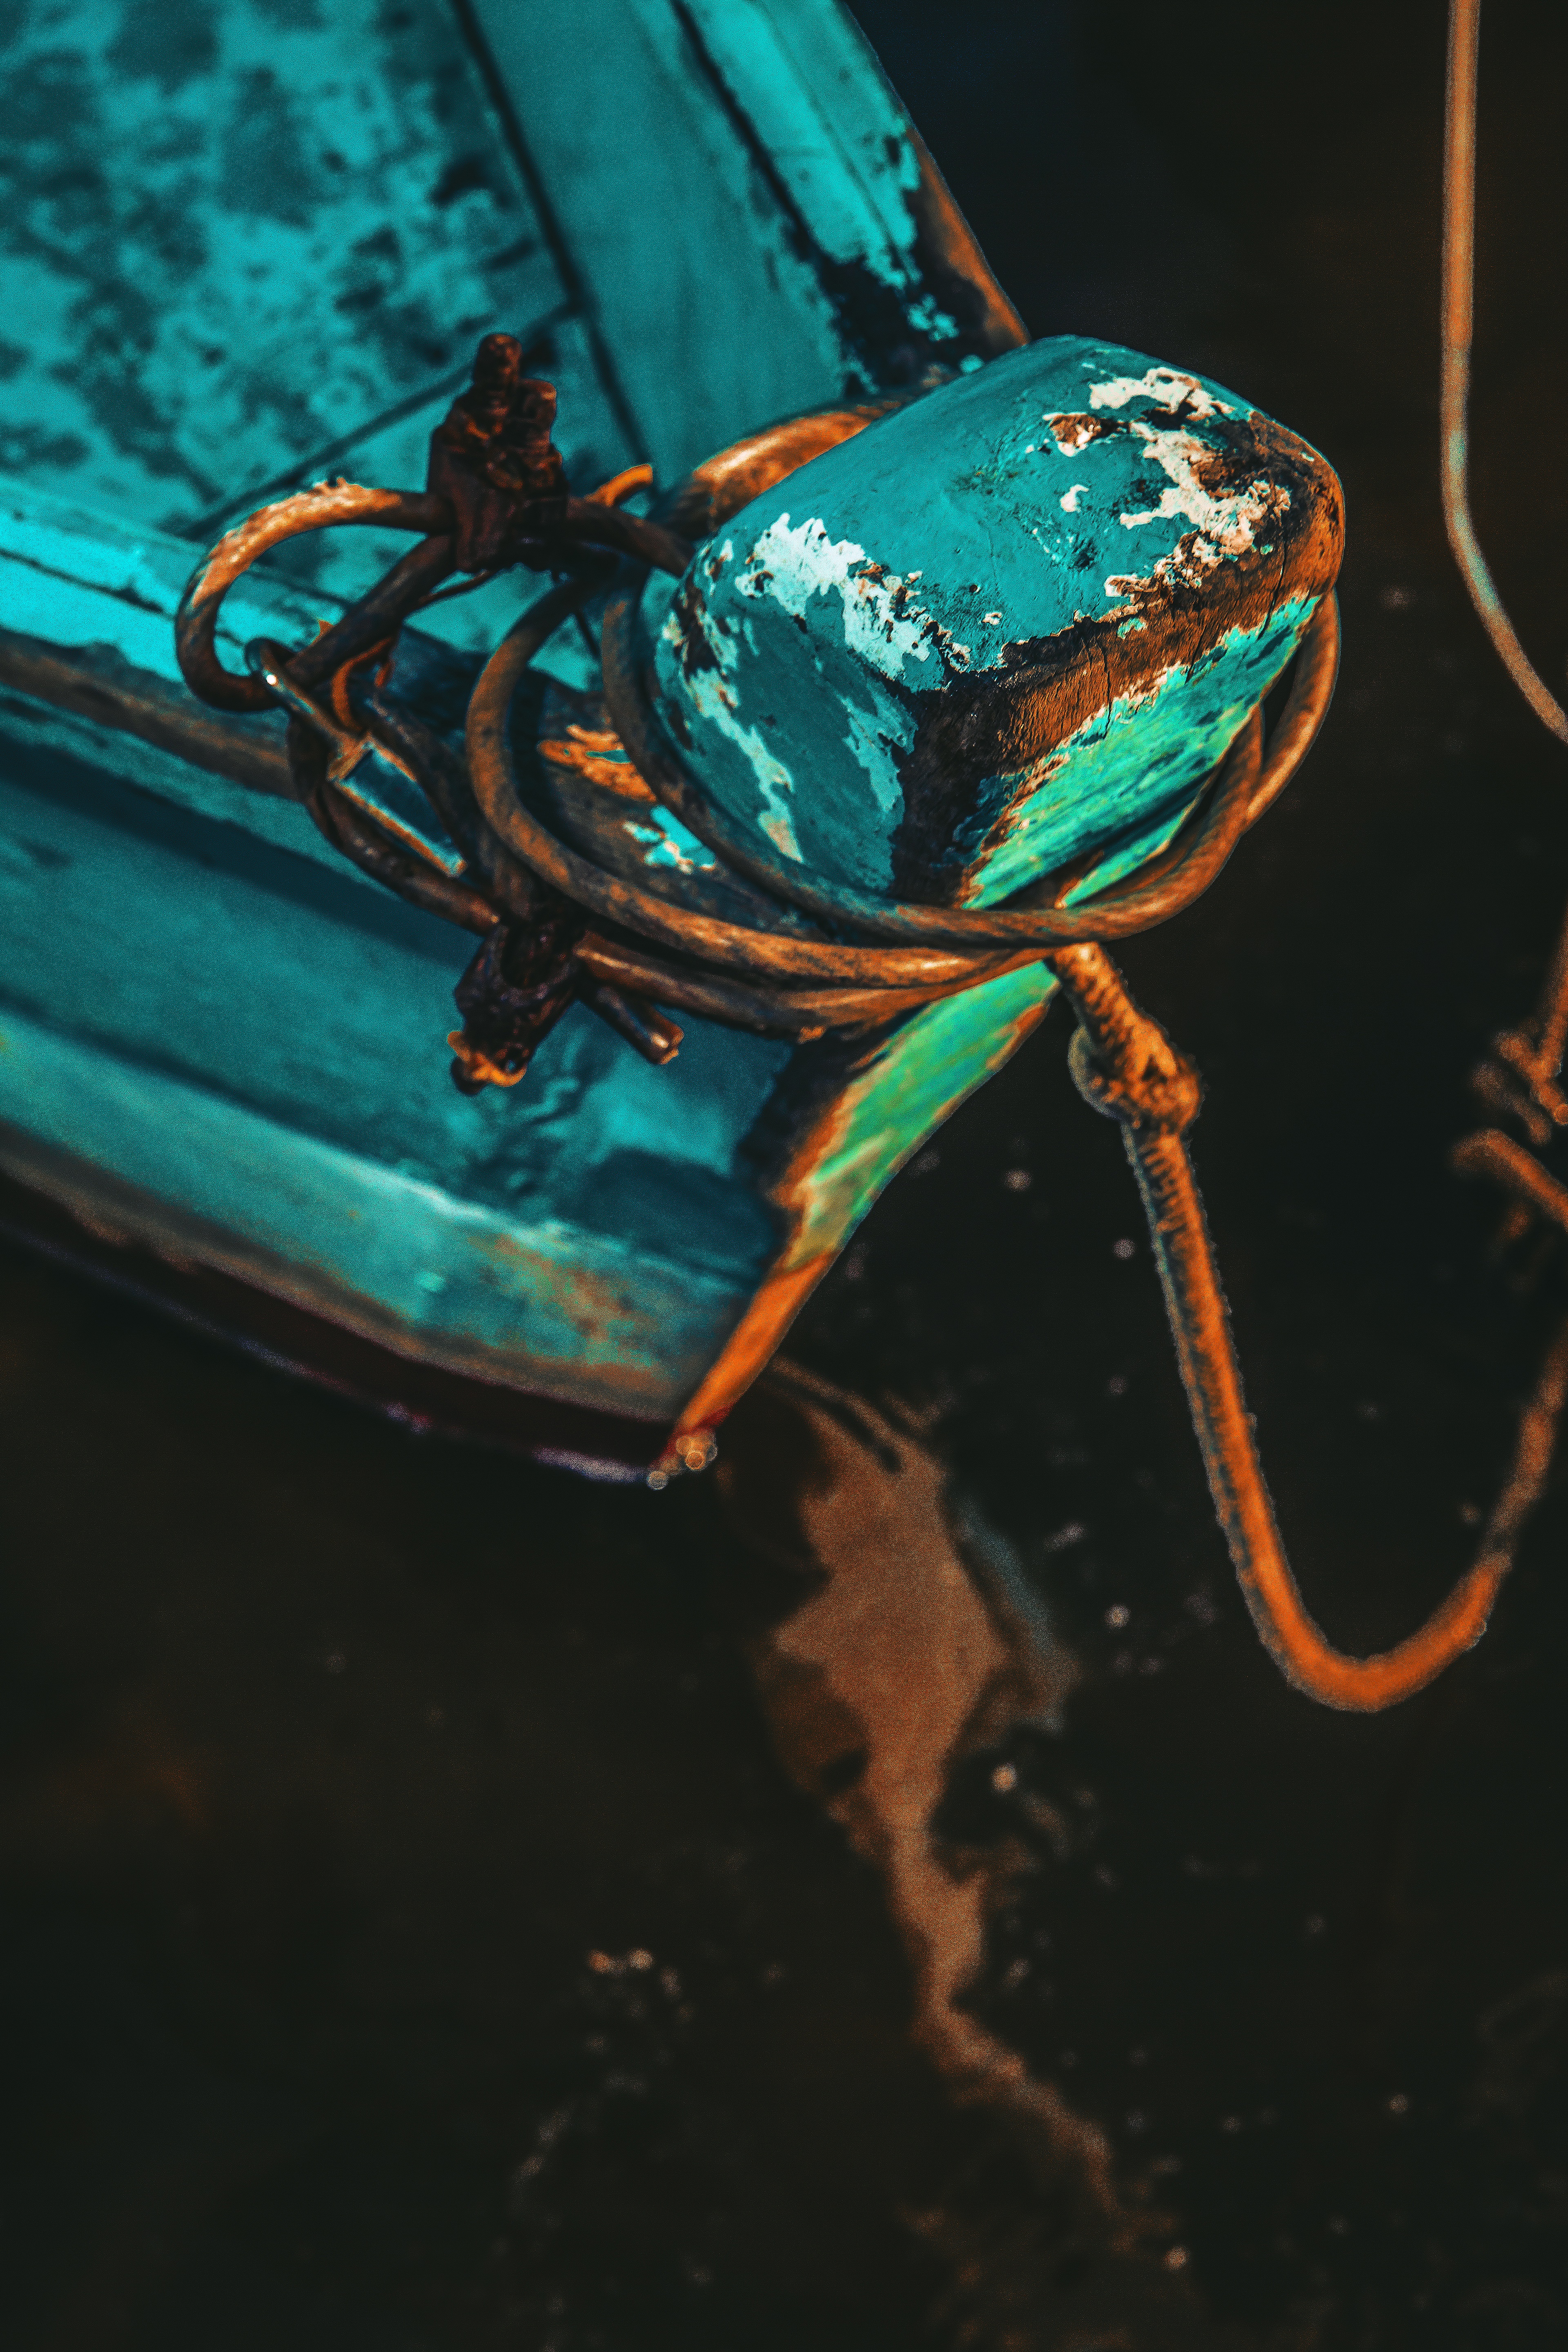 Old Boat, Boat, Old, Rust, Ship, HQ Photo